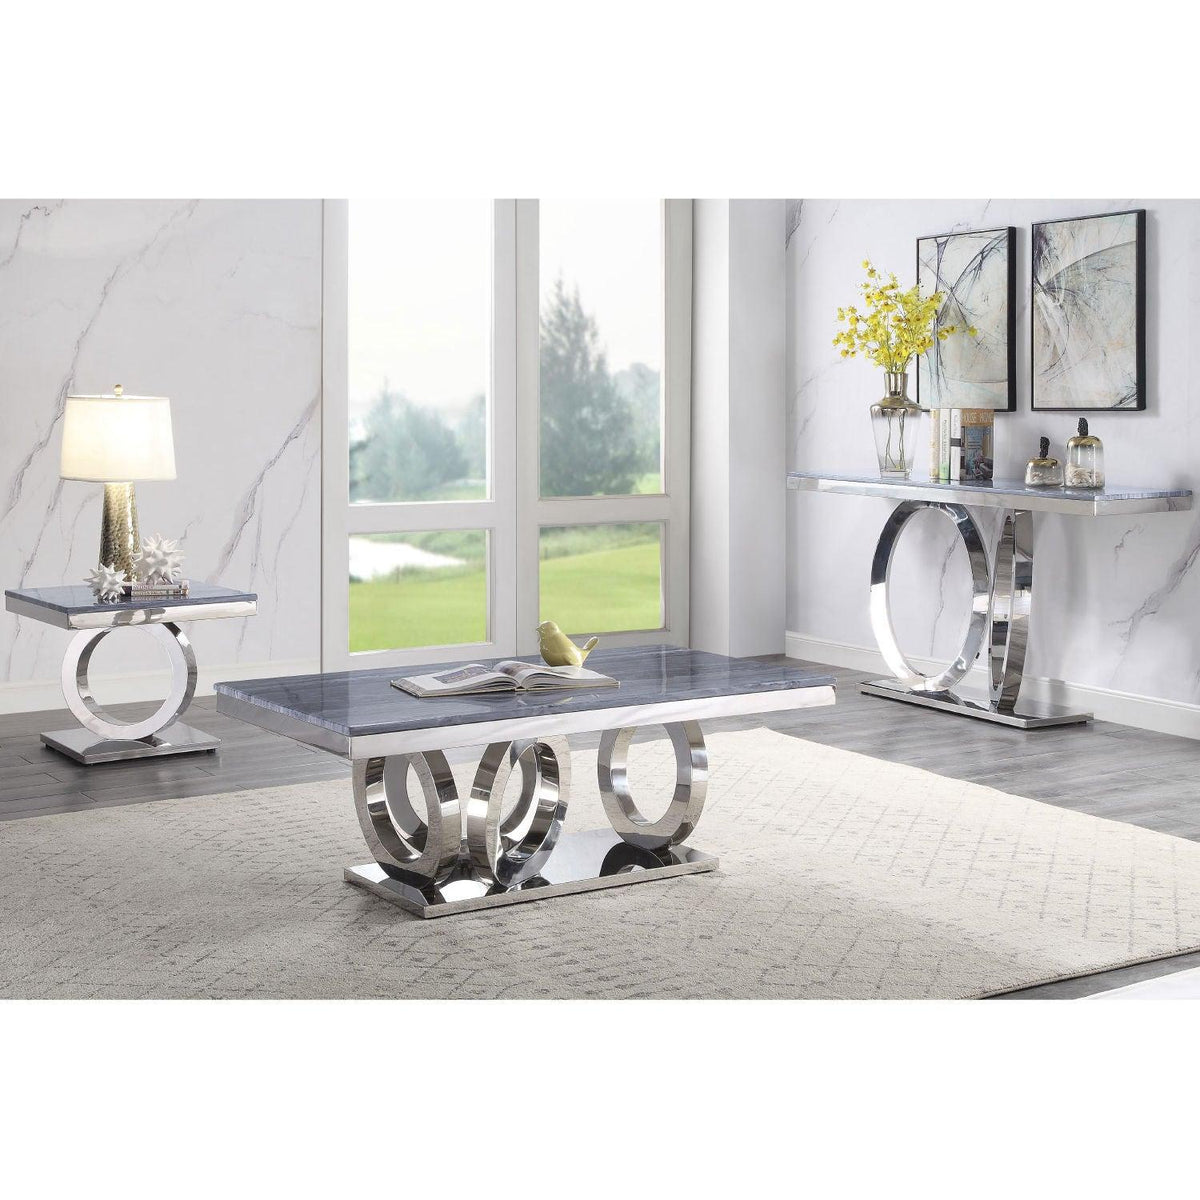 Zasir Gray Printed Faux Marble & Mirrored Silver Finish Table Set  Las Vegas Furniture Stores